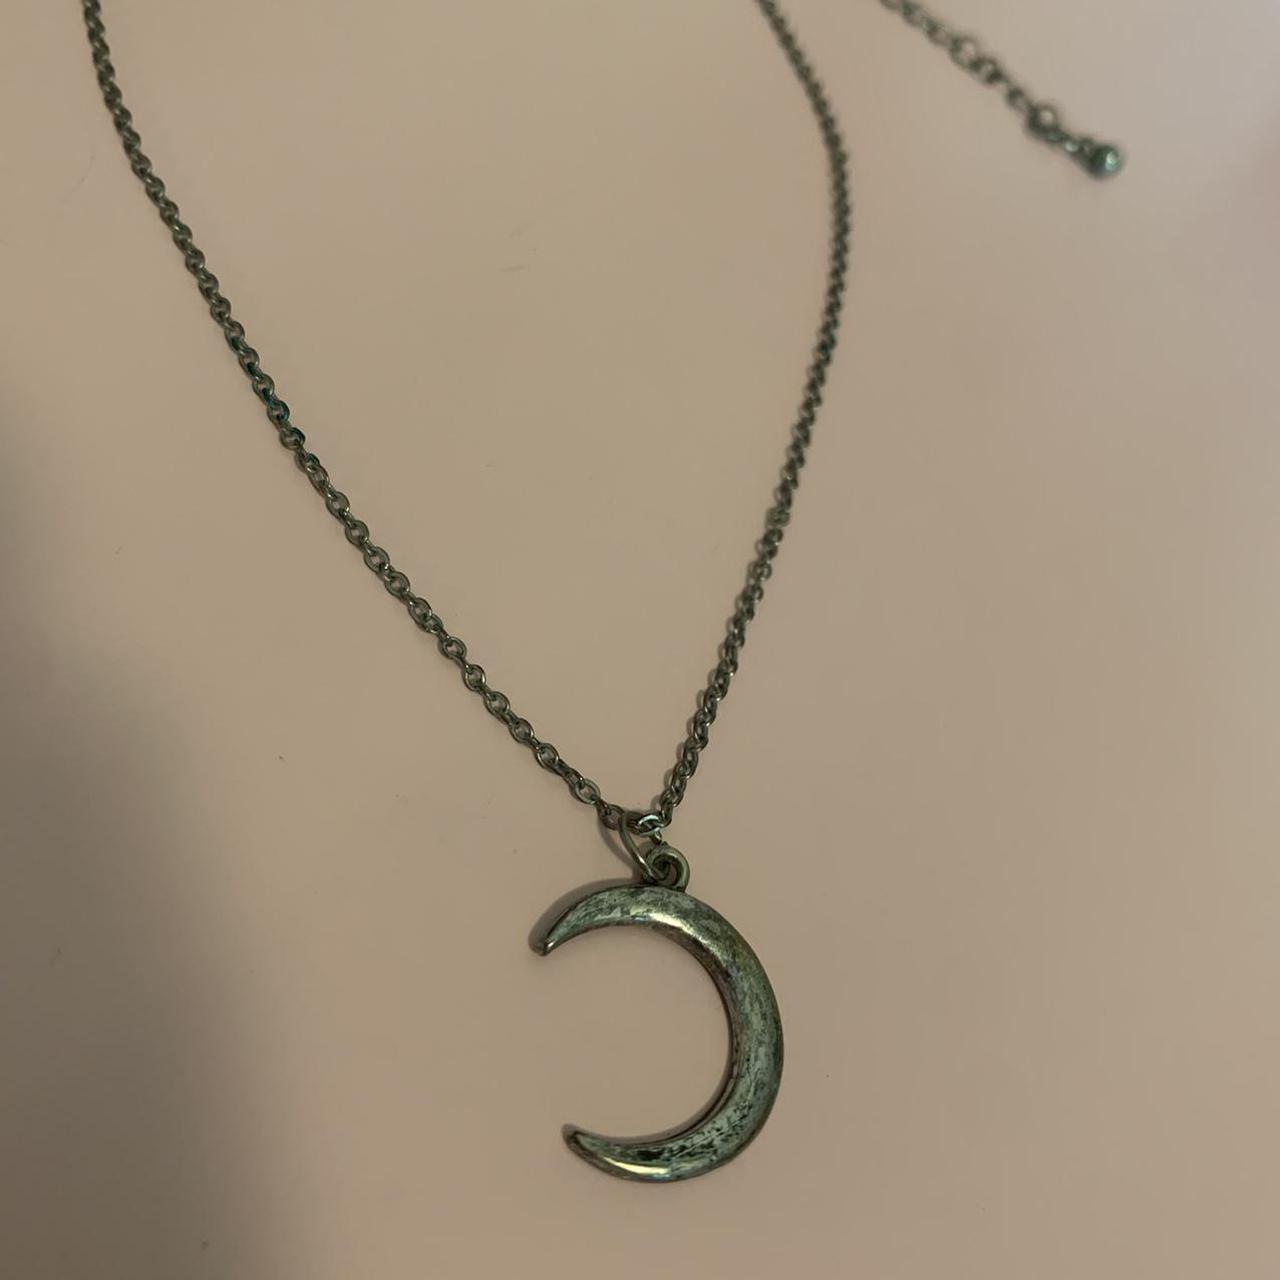 Product Image 2 - Silver crescent moon choker necklace.